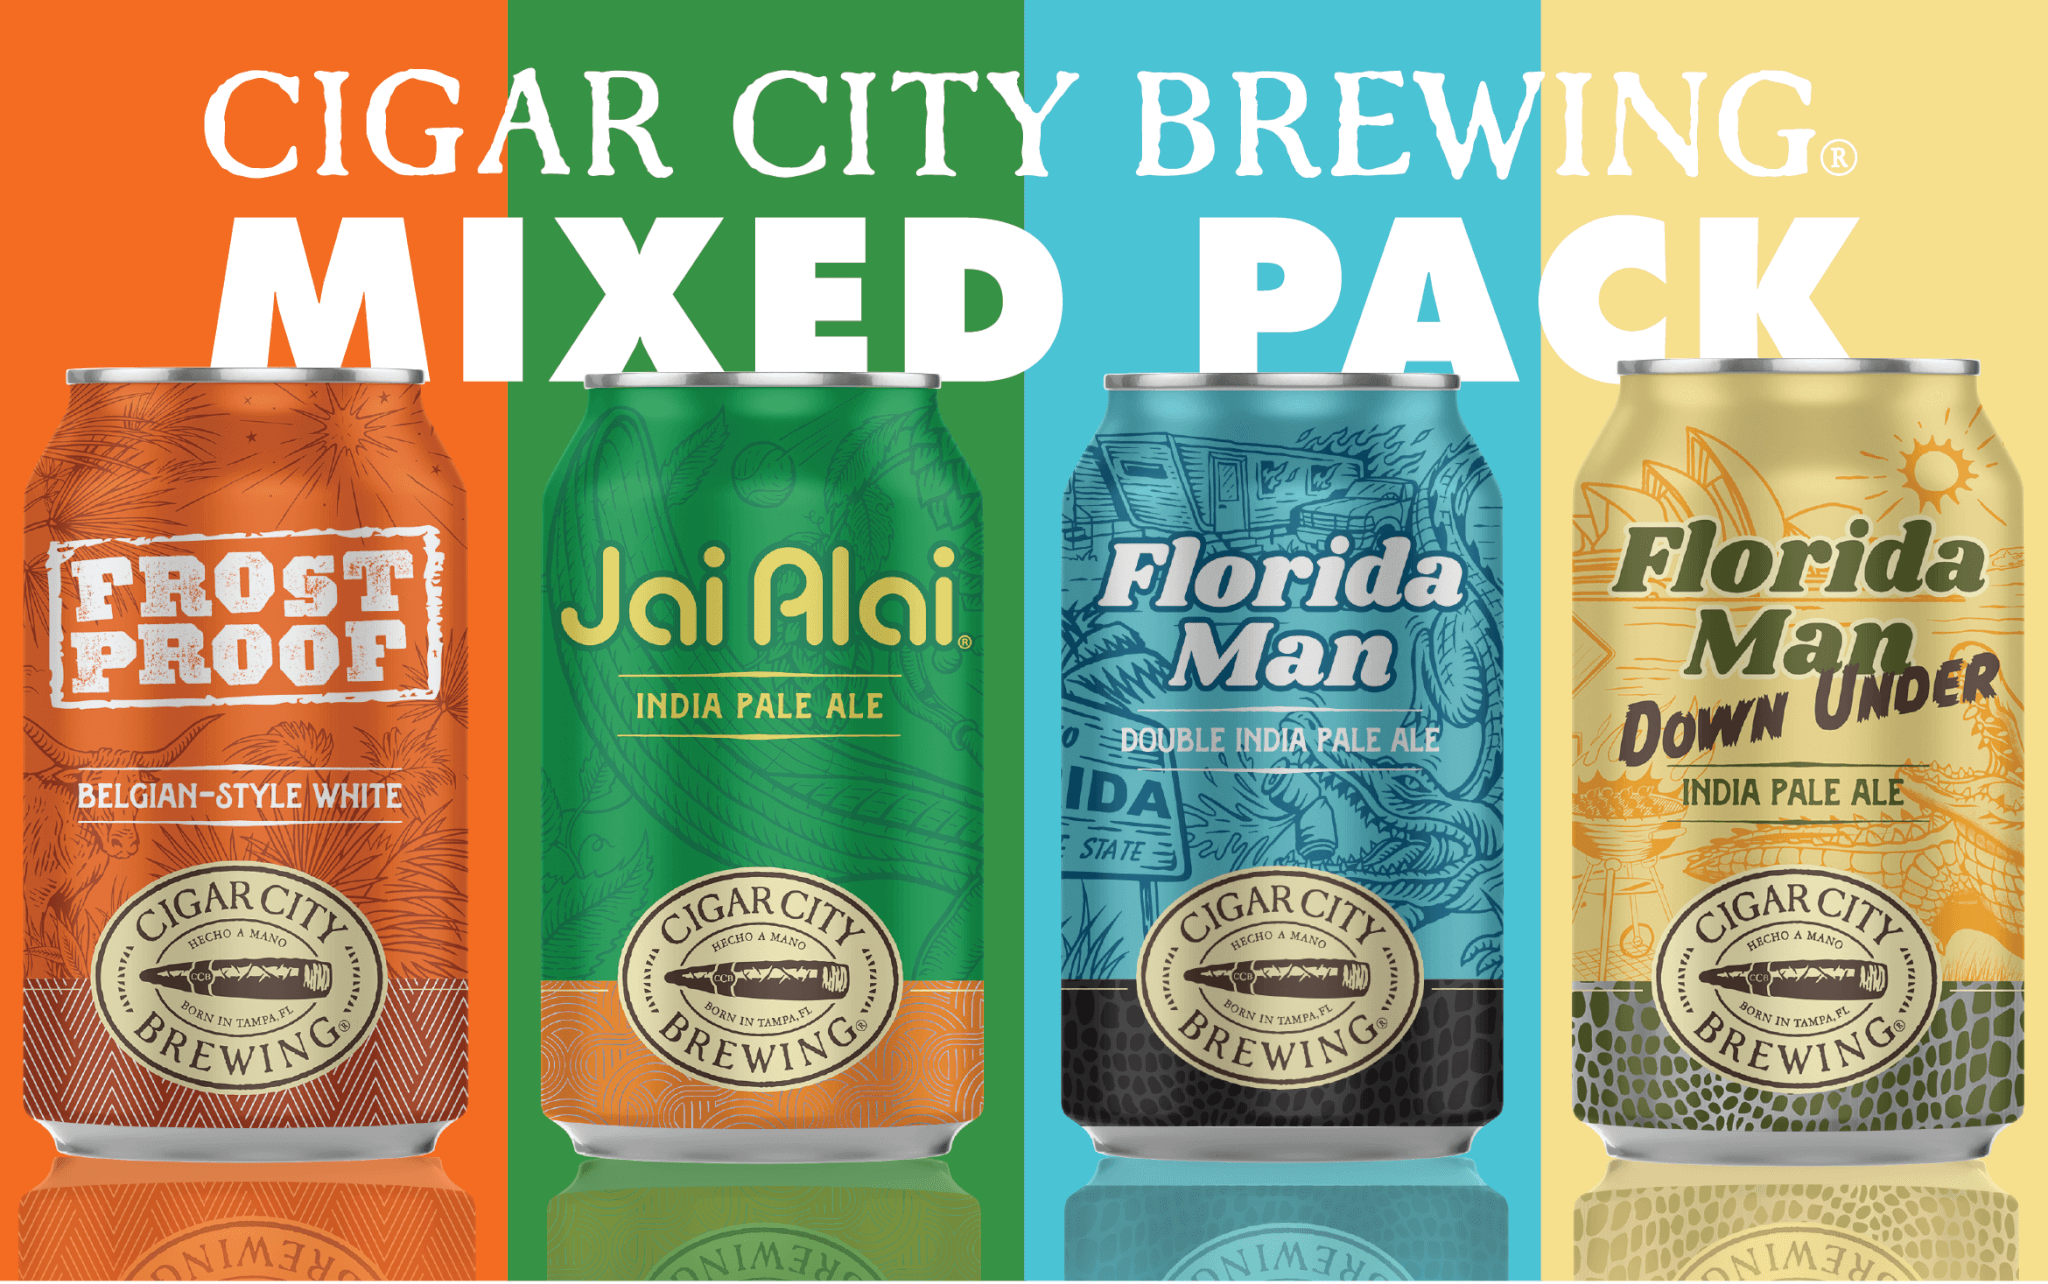 Cigar City Brewing's newest mixed 12-pack features three cans each of Frost Proof Belgian-style White Ale, Jai Alai IPA, Florida Man Double IPA, and Florida Man Down Under IPA.